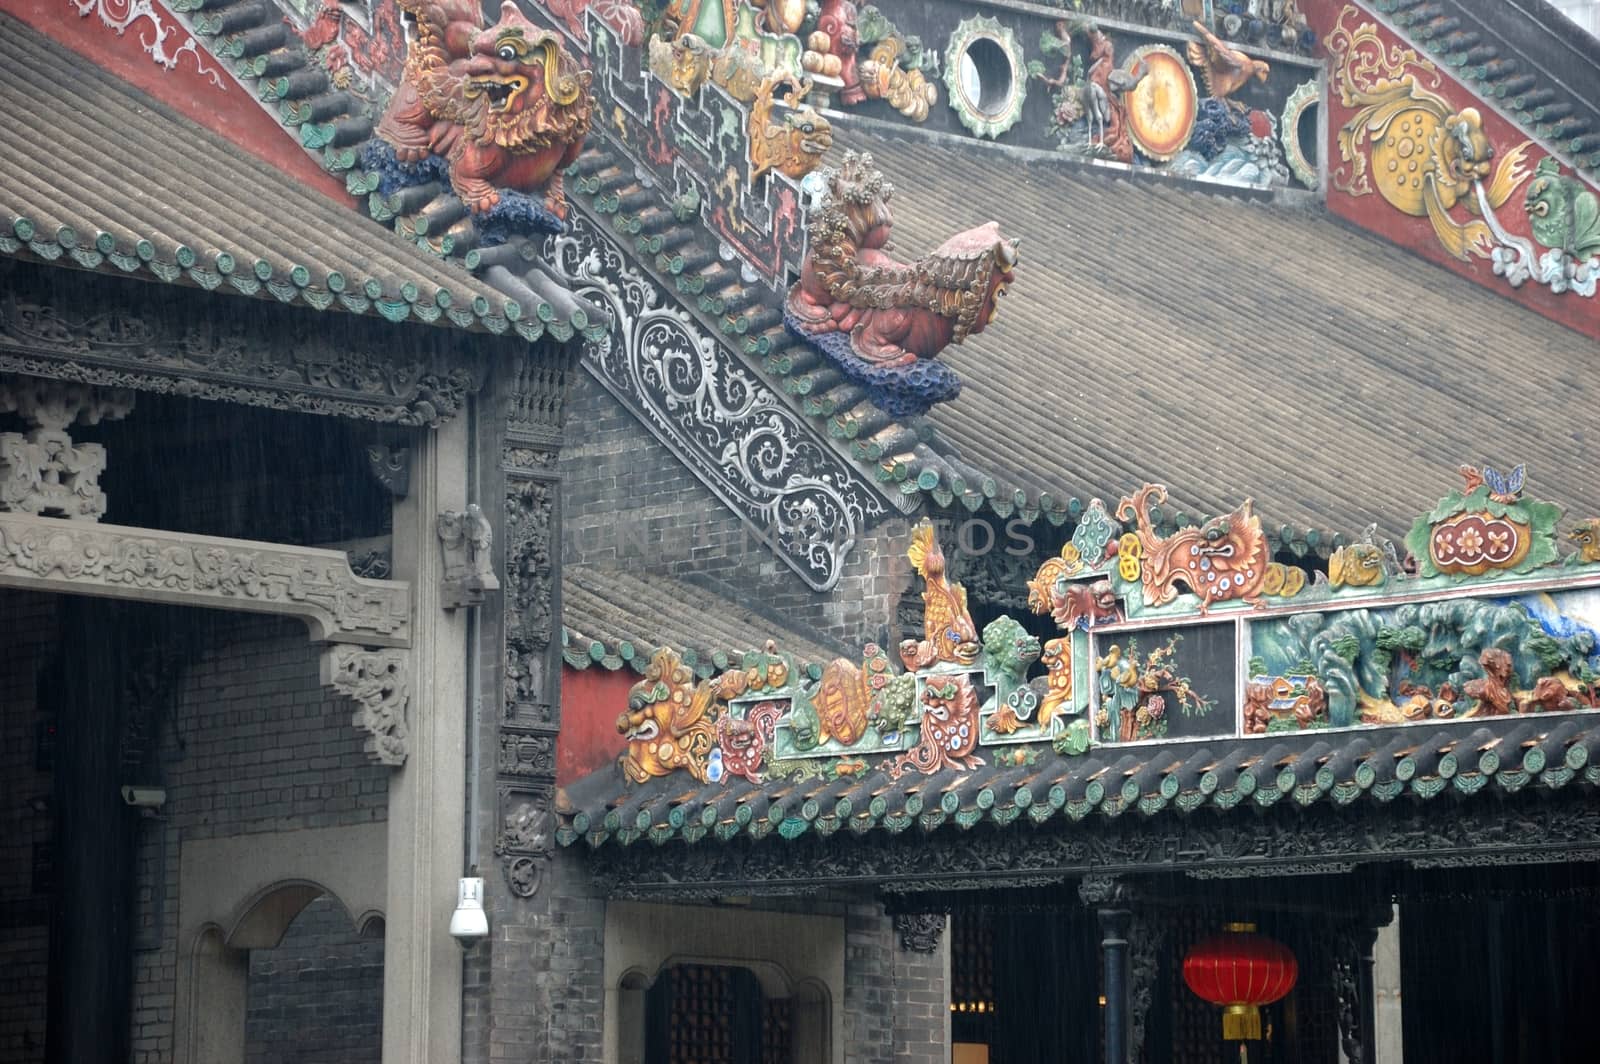 Historical roofs inside Chen Family Temple in Guangzhou, China. Roofs and colums with colorful decorations.